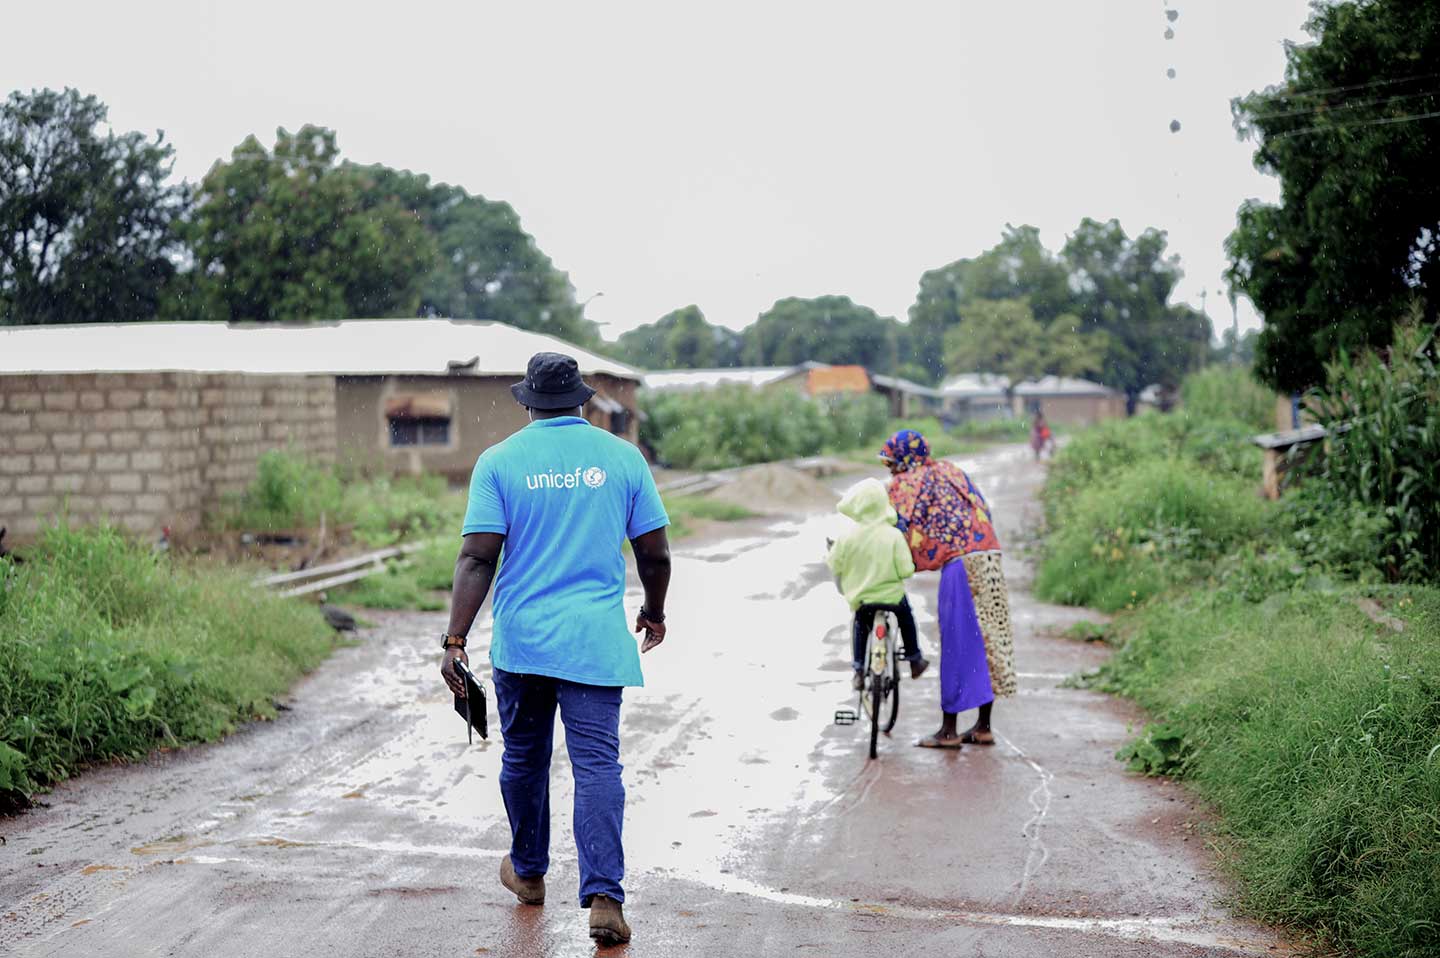 UNICEF driver Joseph Houndebesso on a house-to-house visit to monitor awareness of the polio vaccination campaign in the Volta Region on 9 September 2020. ©UNICEF/MILLS